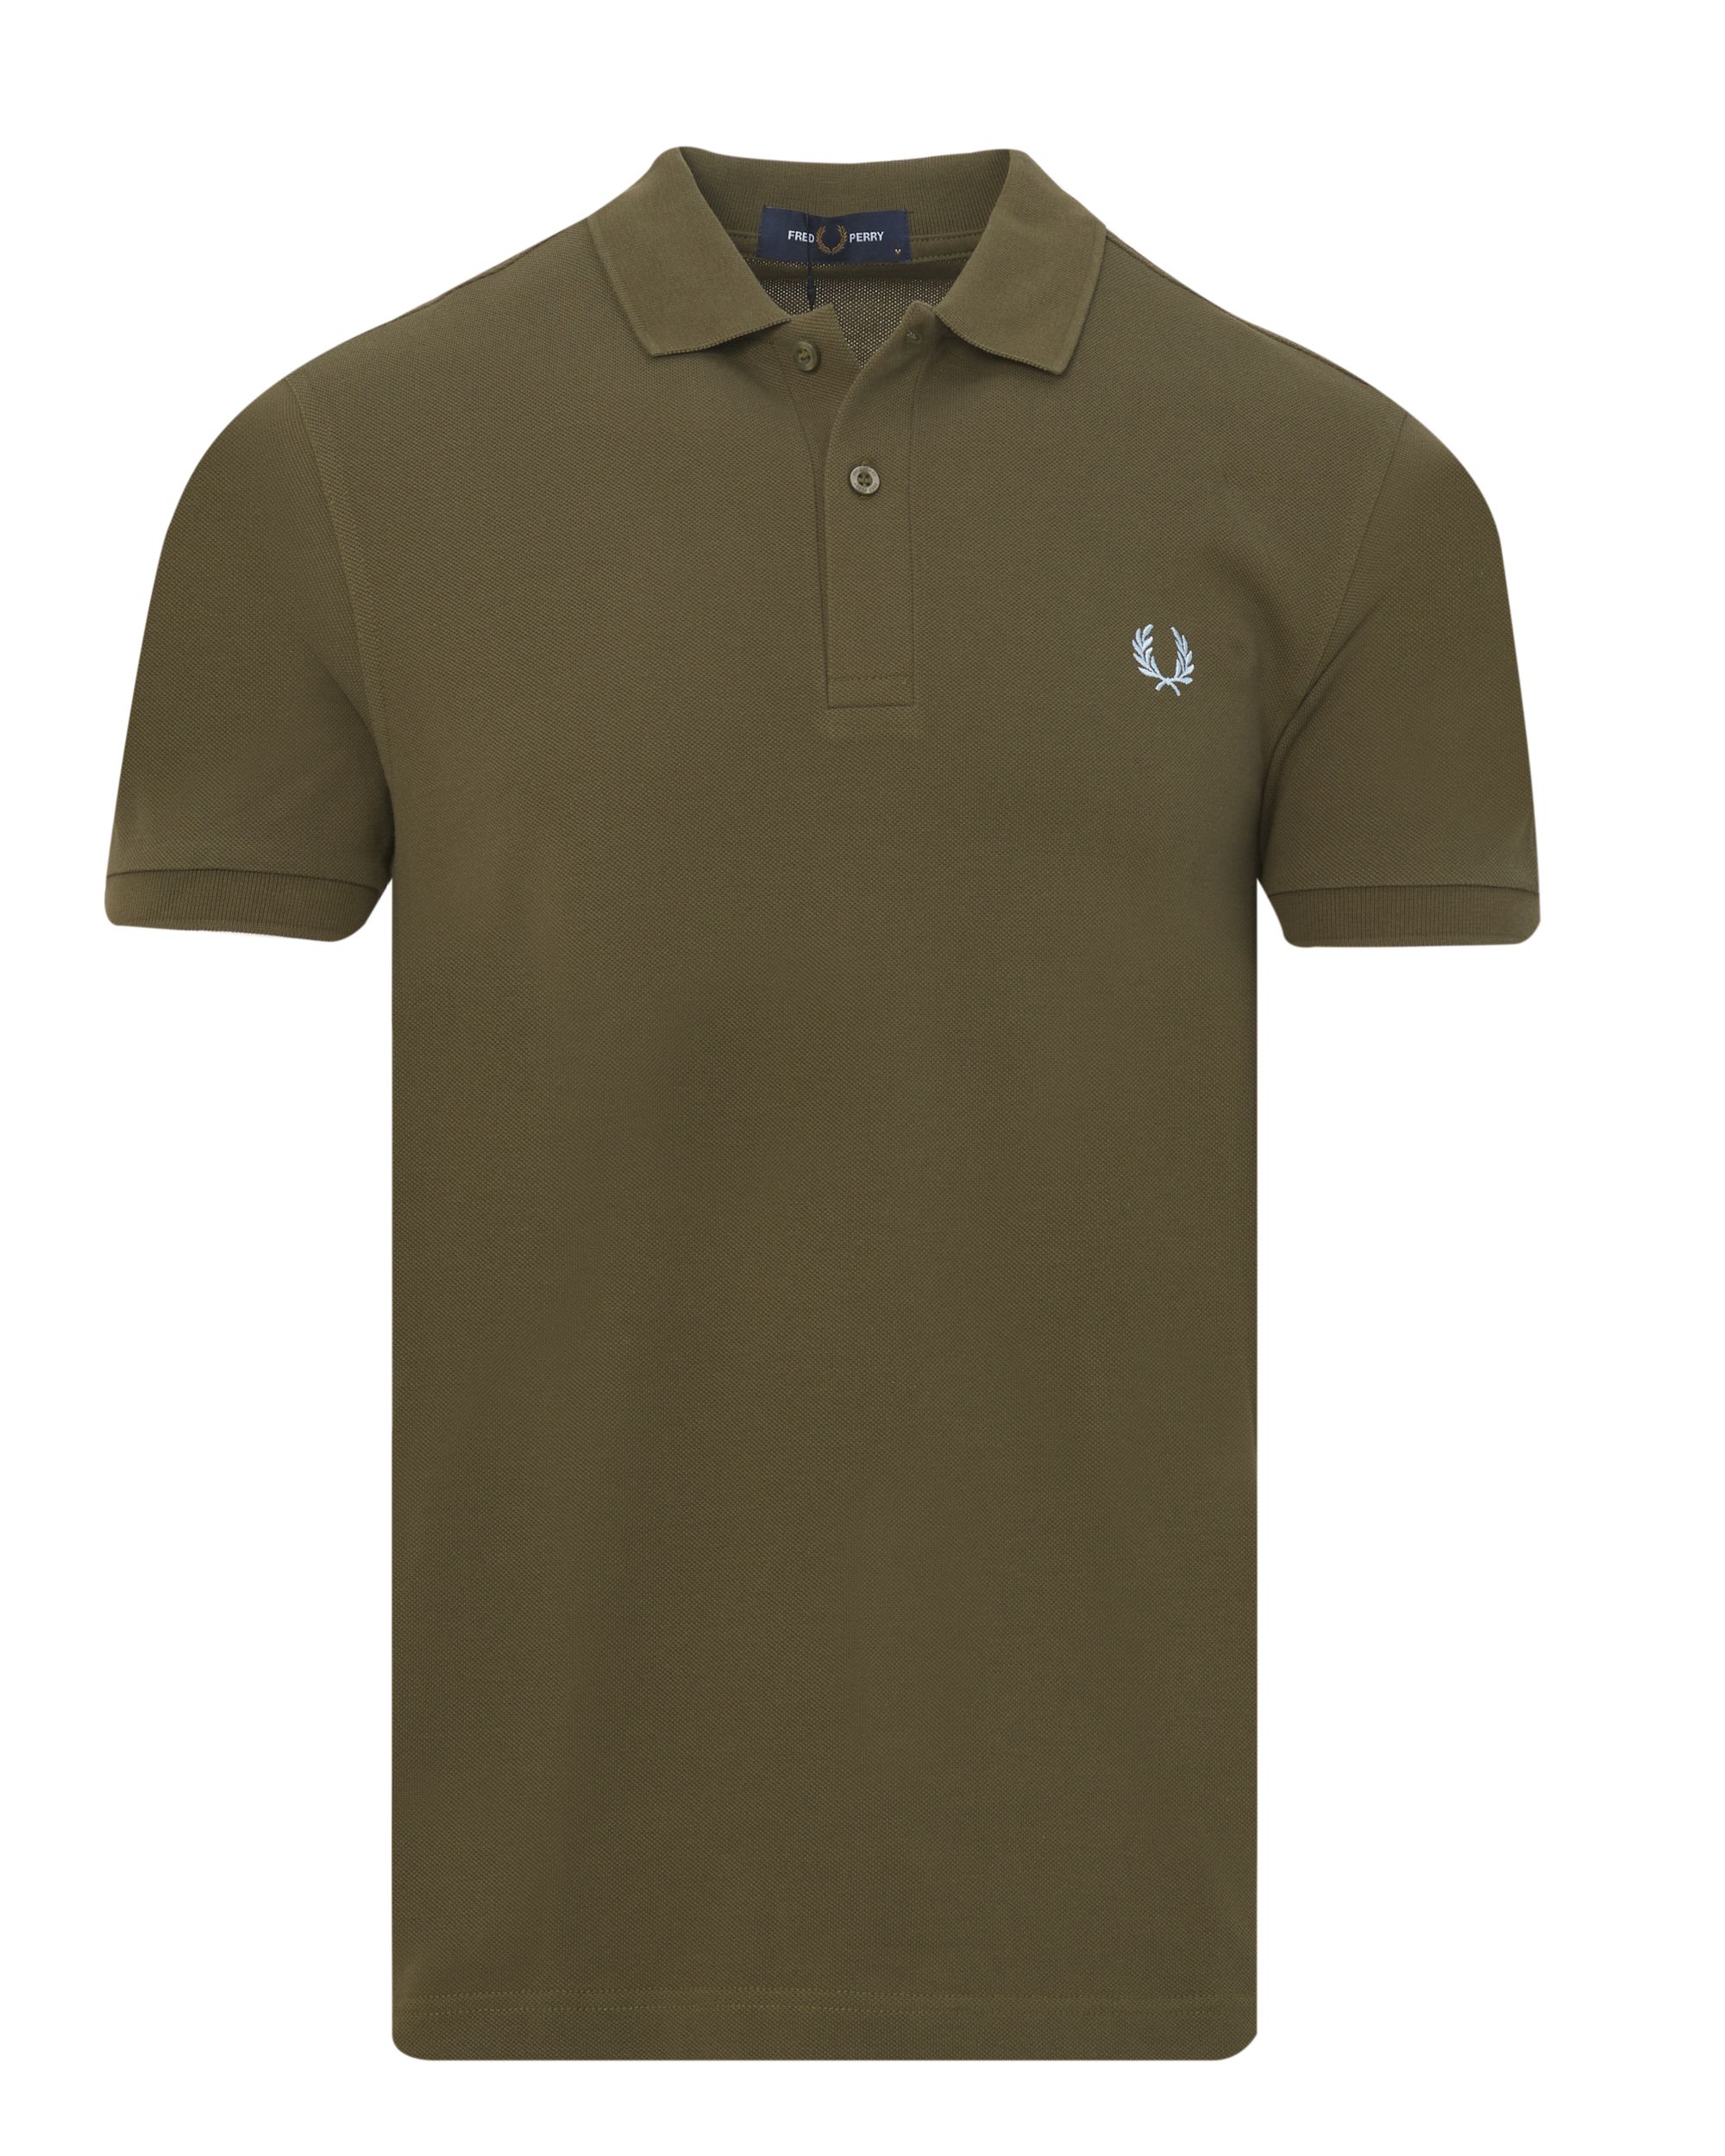 Fred Perry Polo KM Donker groen 083535-001-L